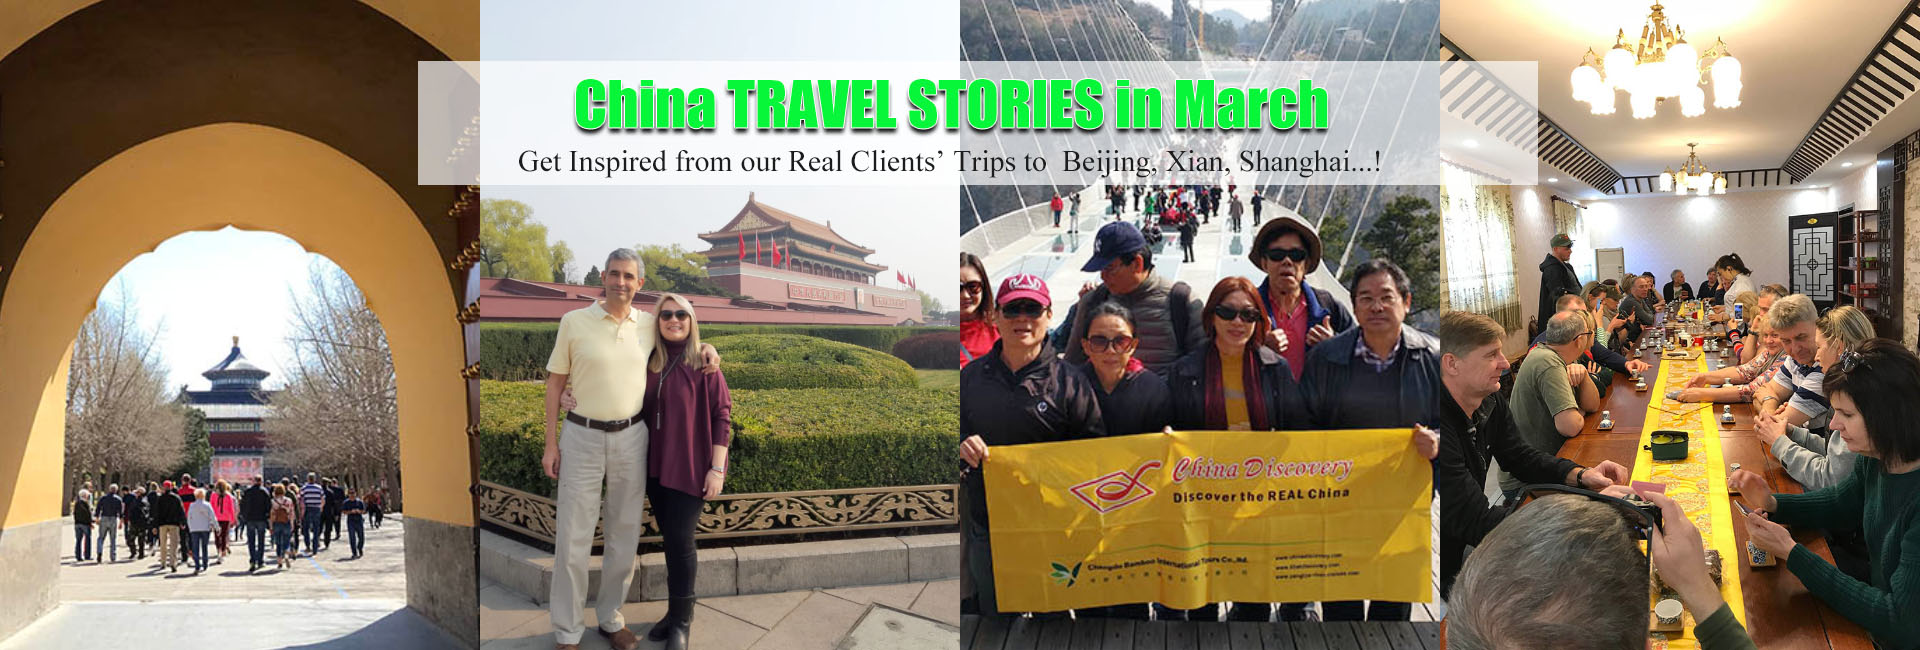 China Travel Stories in March